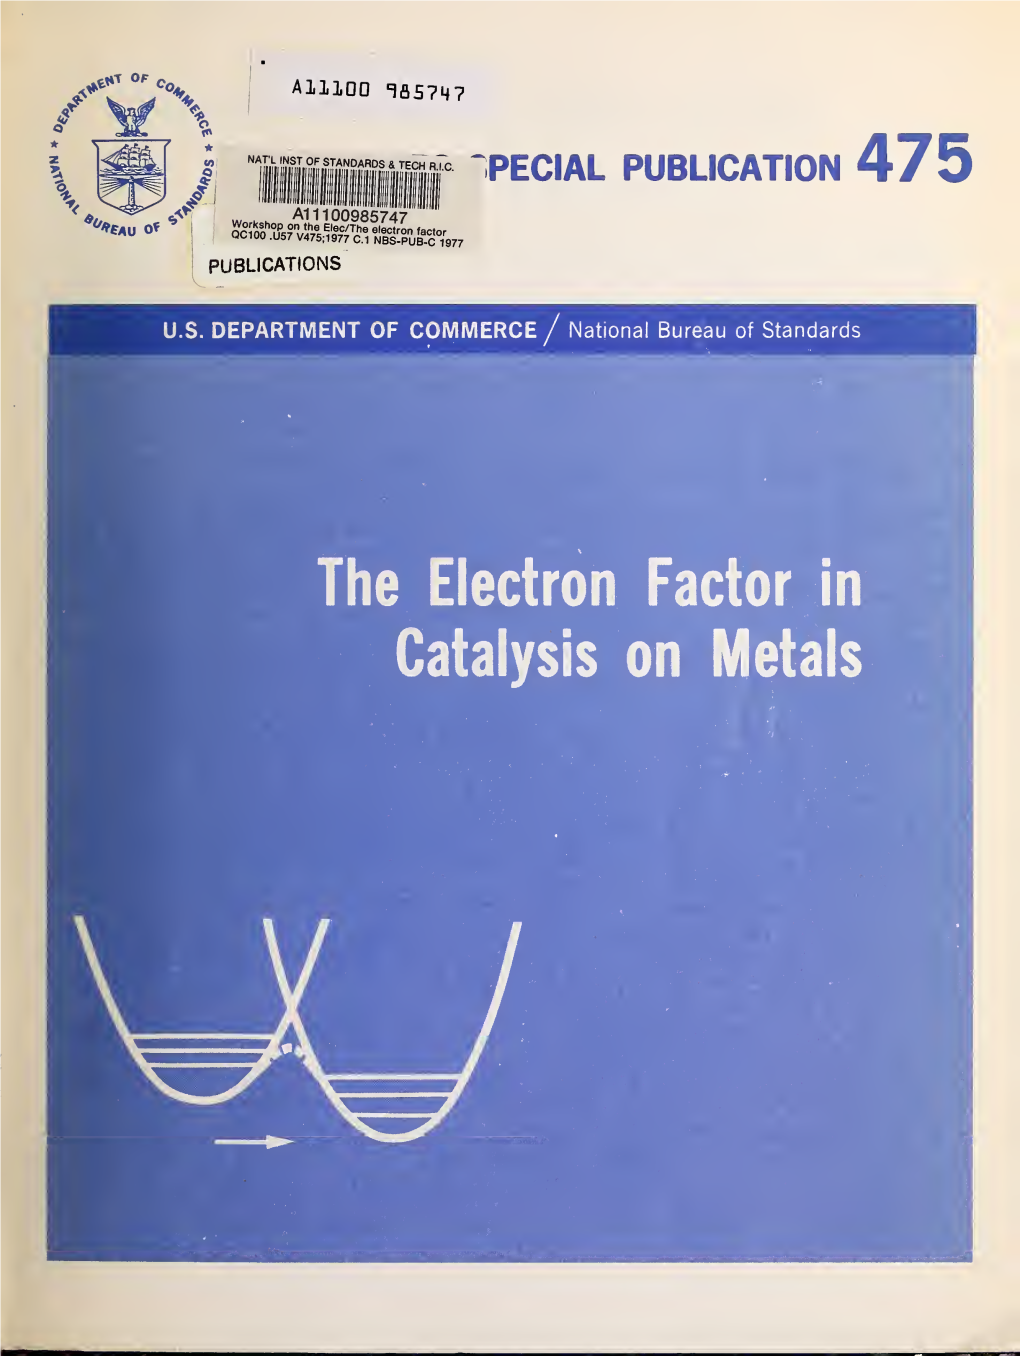 The Electron Factor in Catalysis on Metals